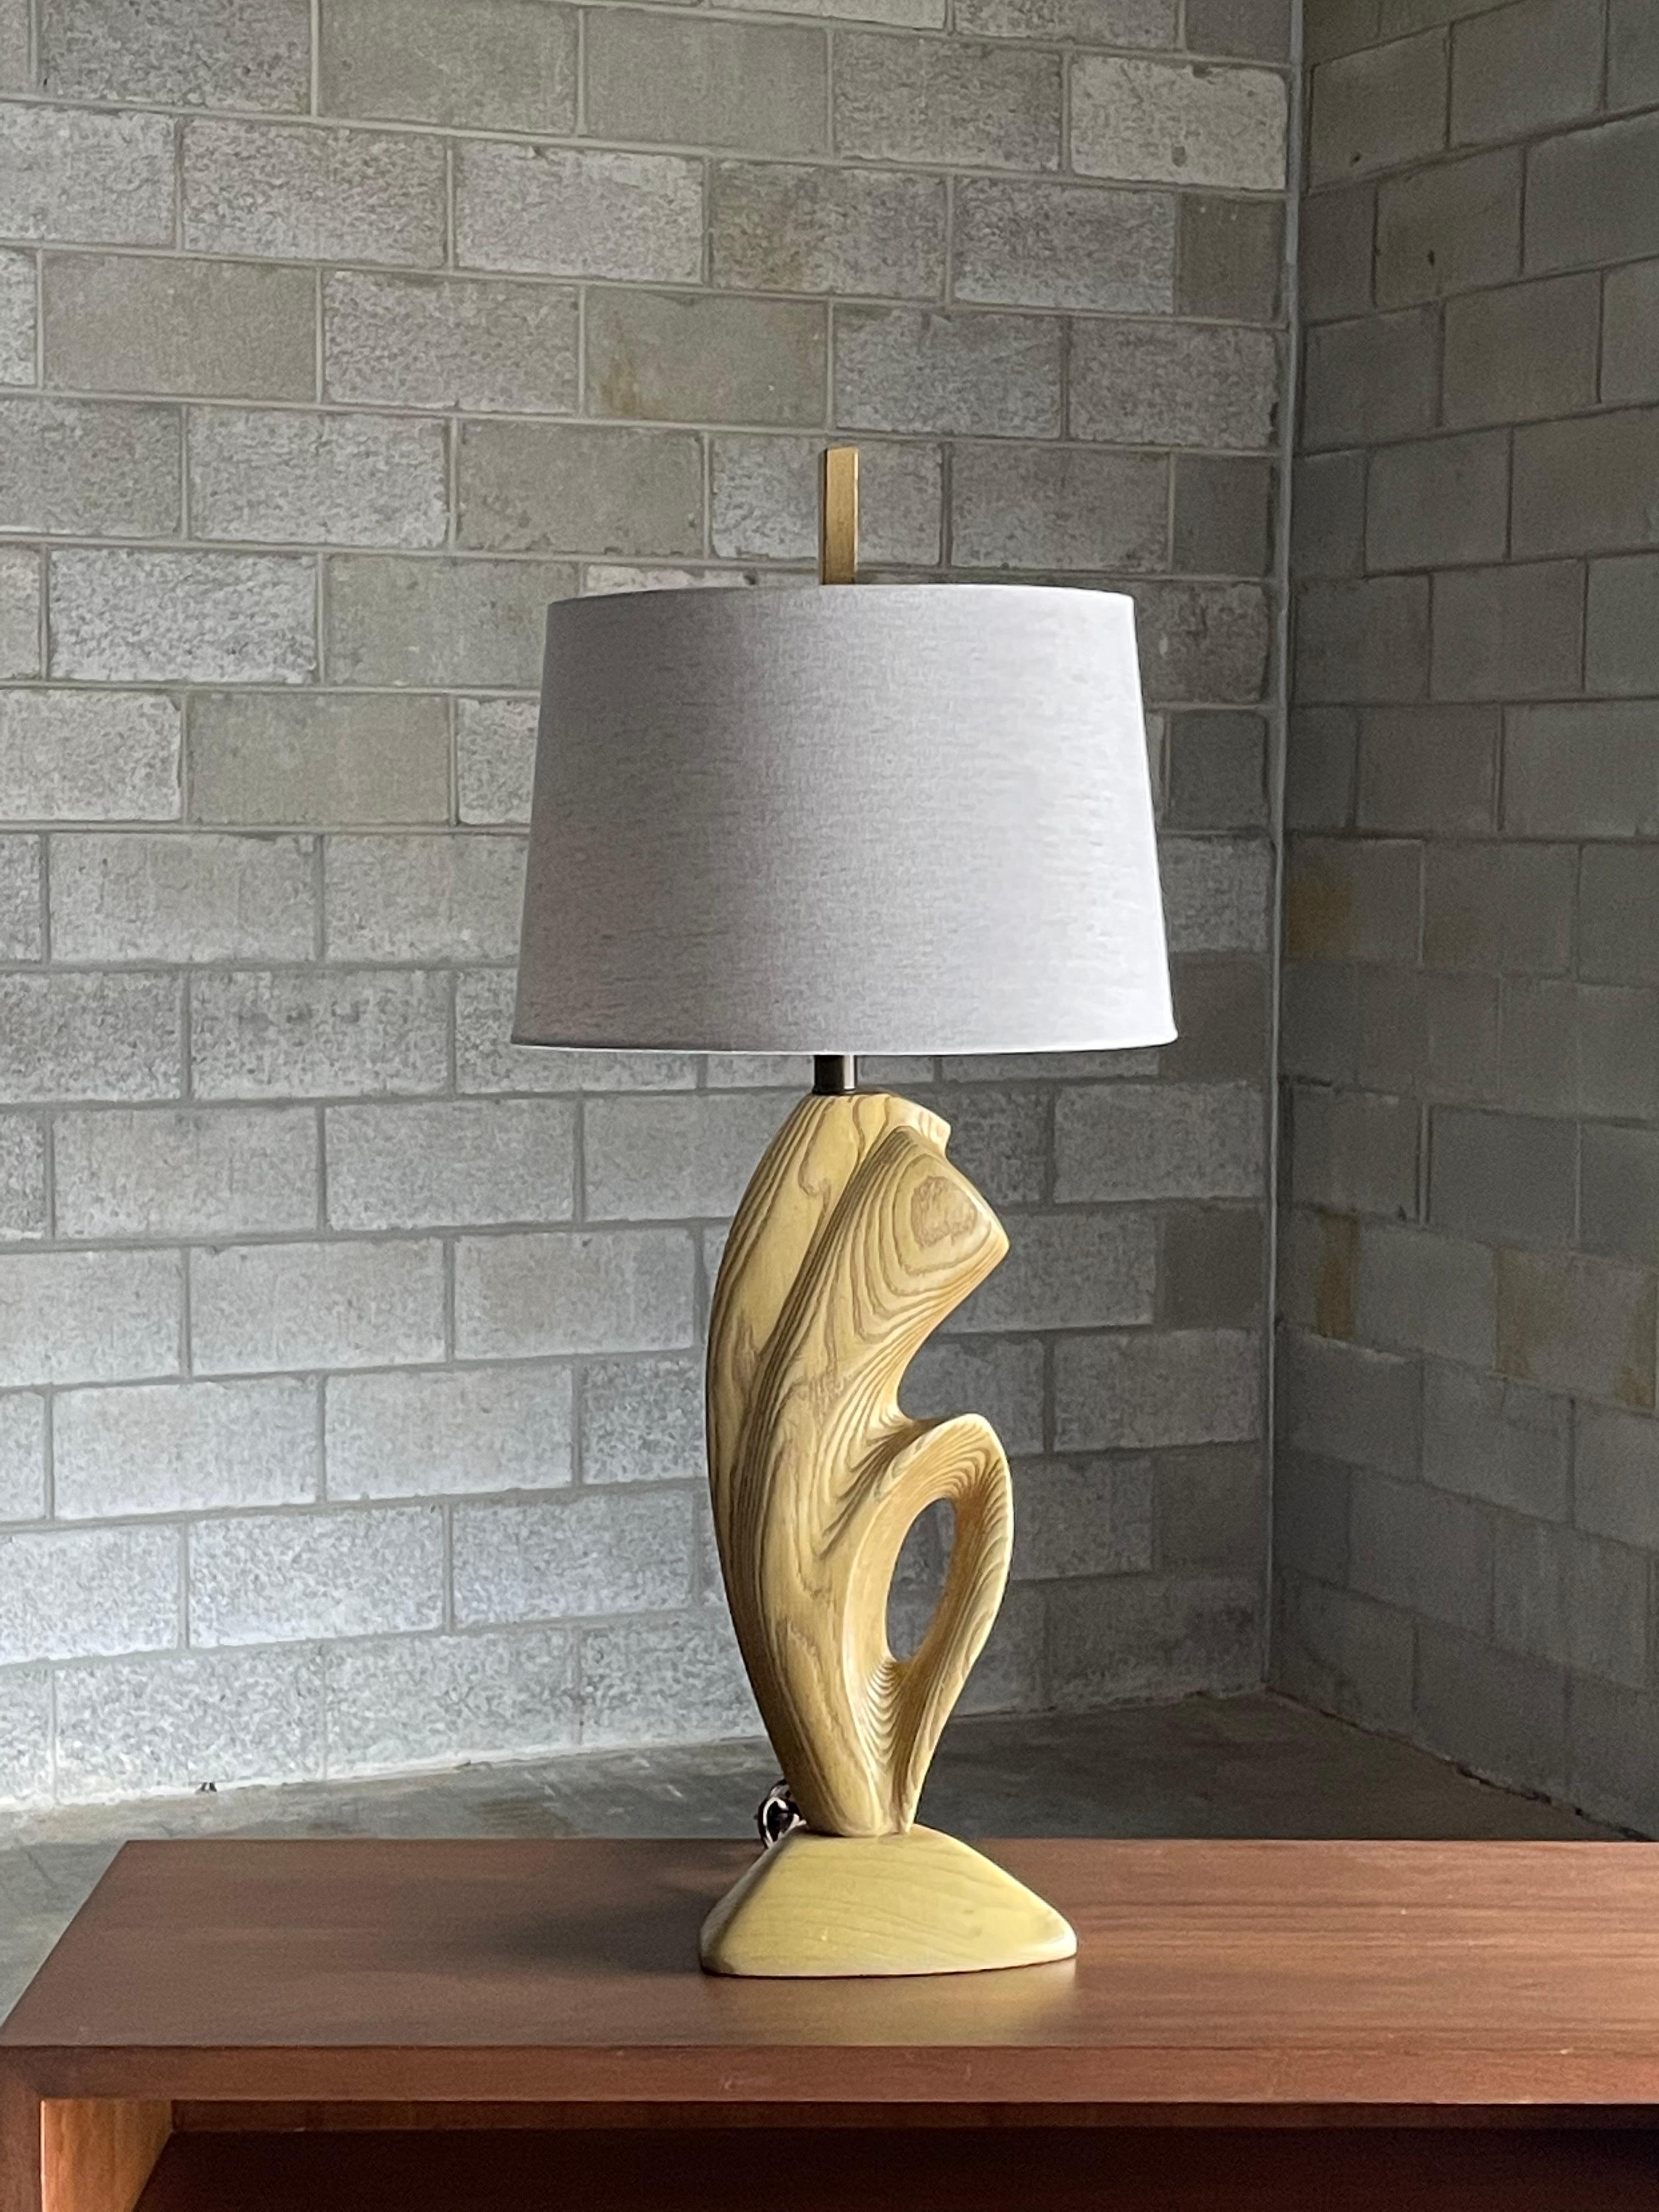 A large scale table lamp attributed to Yasha Heifetz. Wonderful neutral cerused finish. Great presence and organic shape. 

Other notable lamp makers include Modeline, Laurel, etc

Overall
34.5” tall
15” wide

Wooden body 
20” tall
7.25”